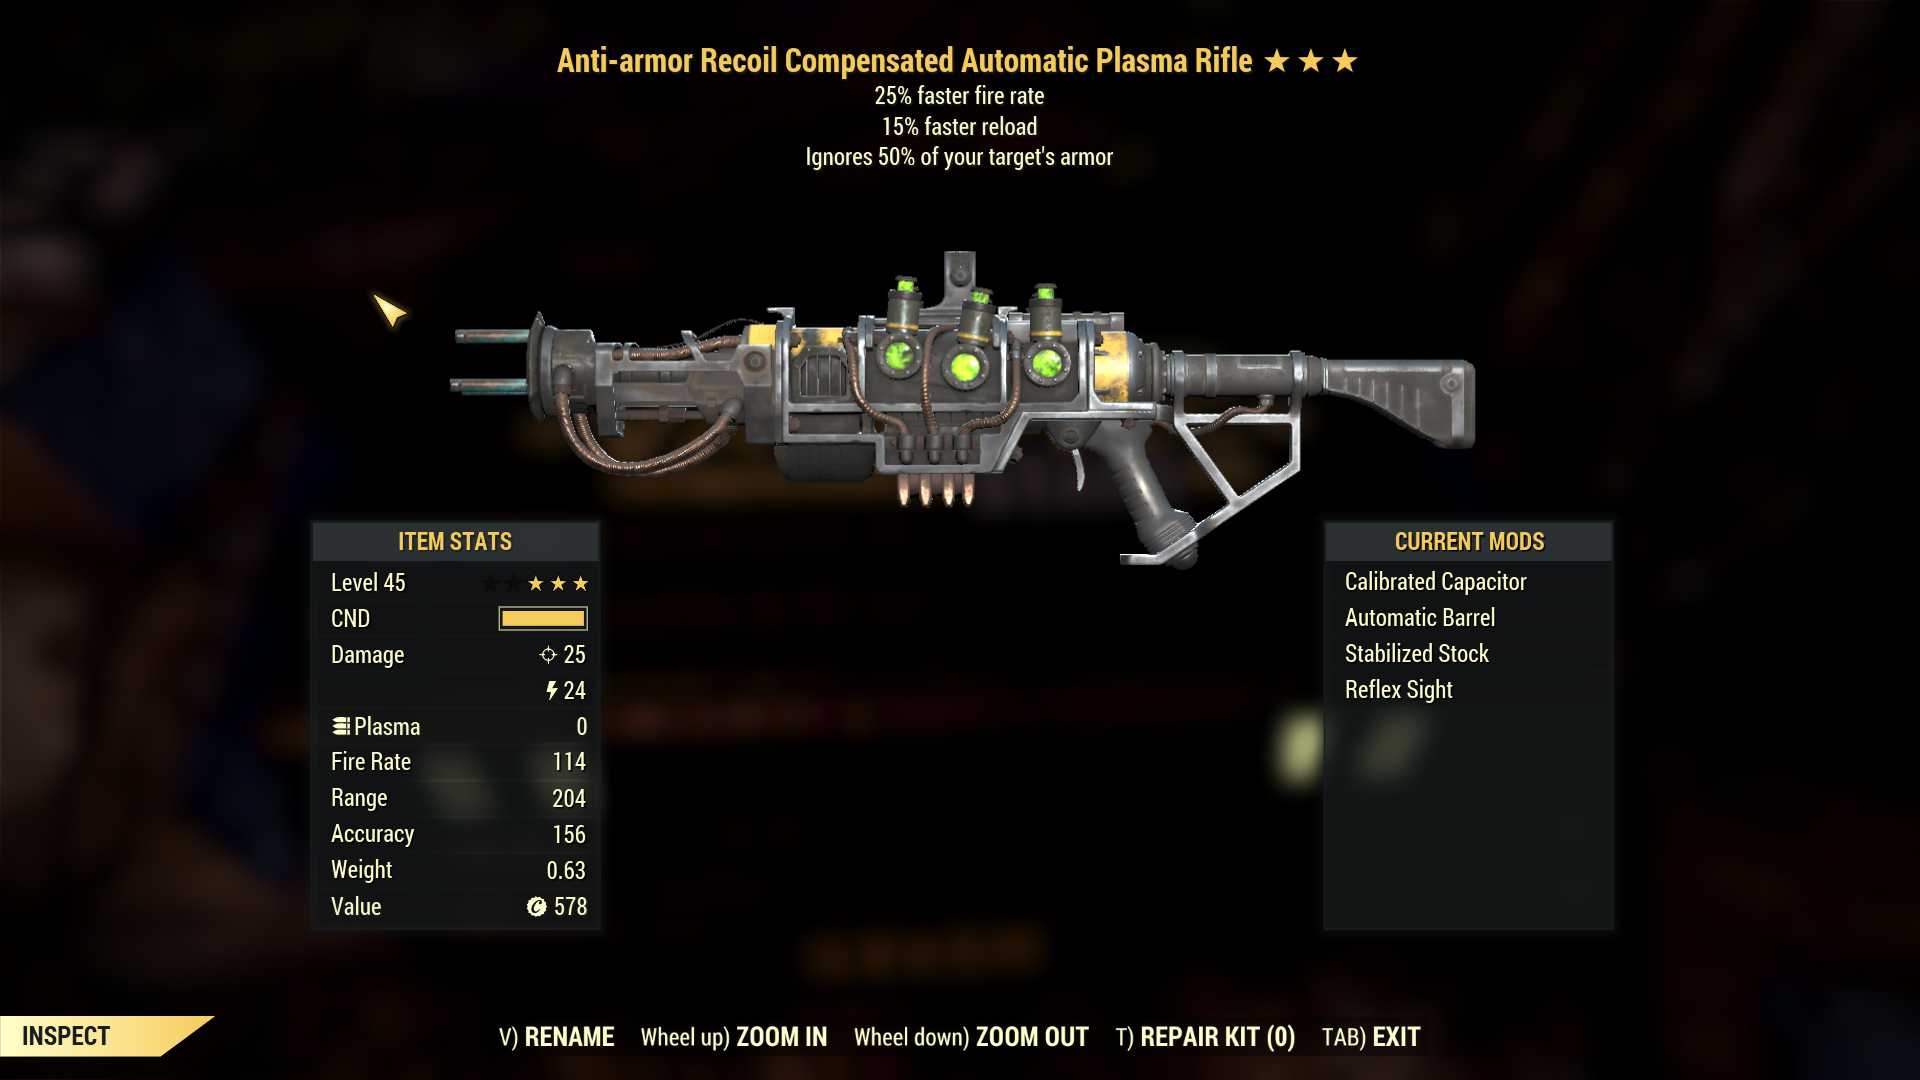 Anti-Armor Plasma rifle (25% faster fire rate, 15% faster reload)